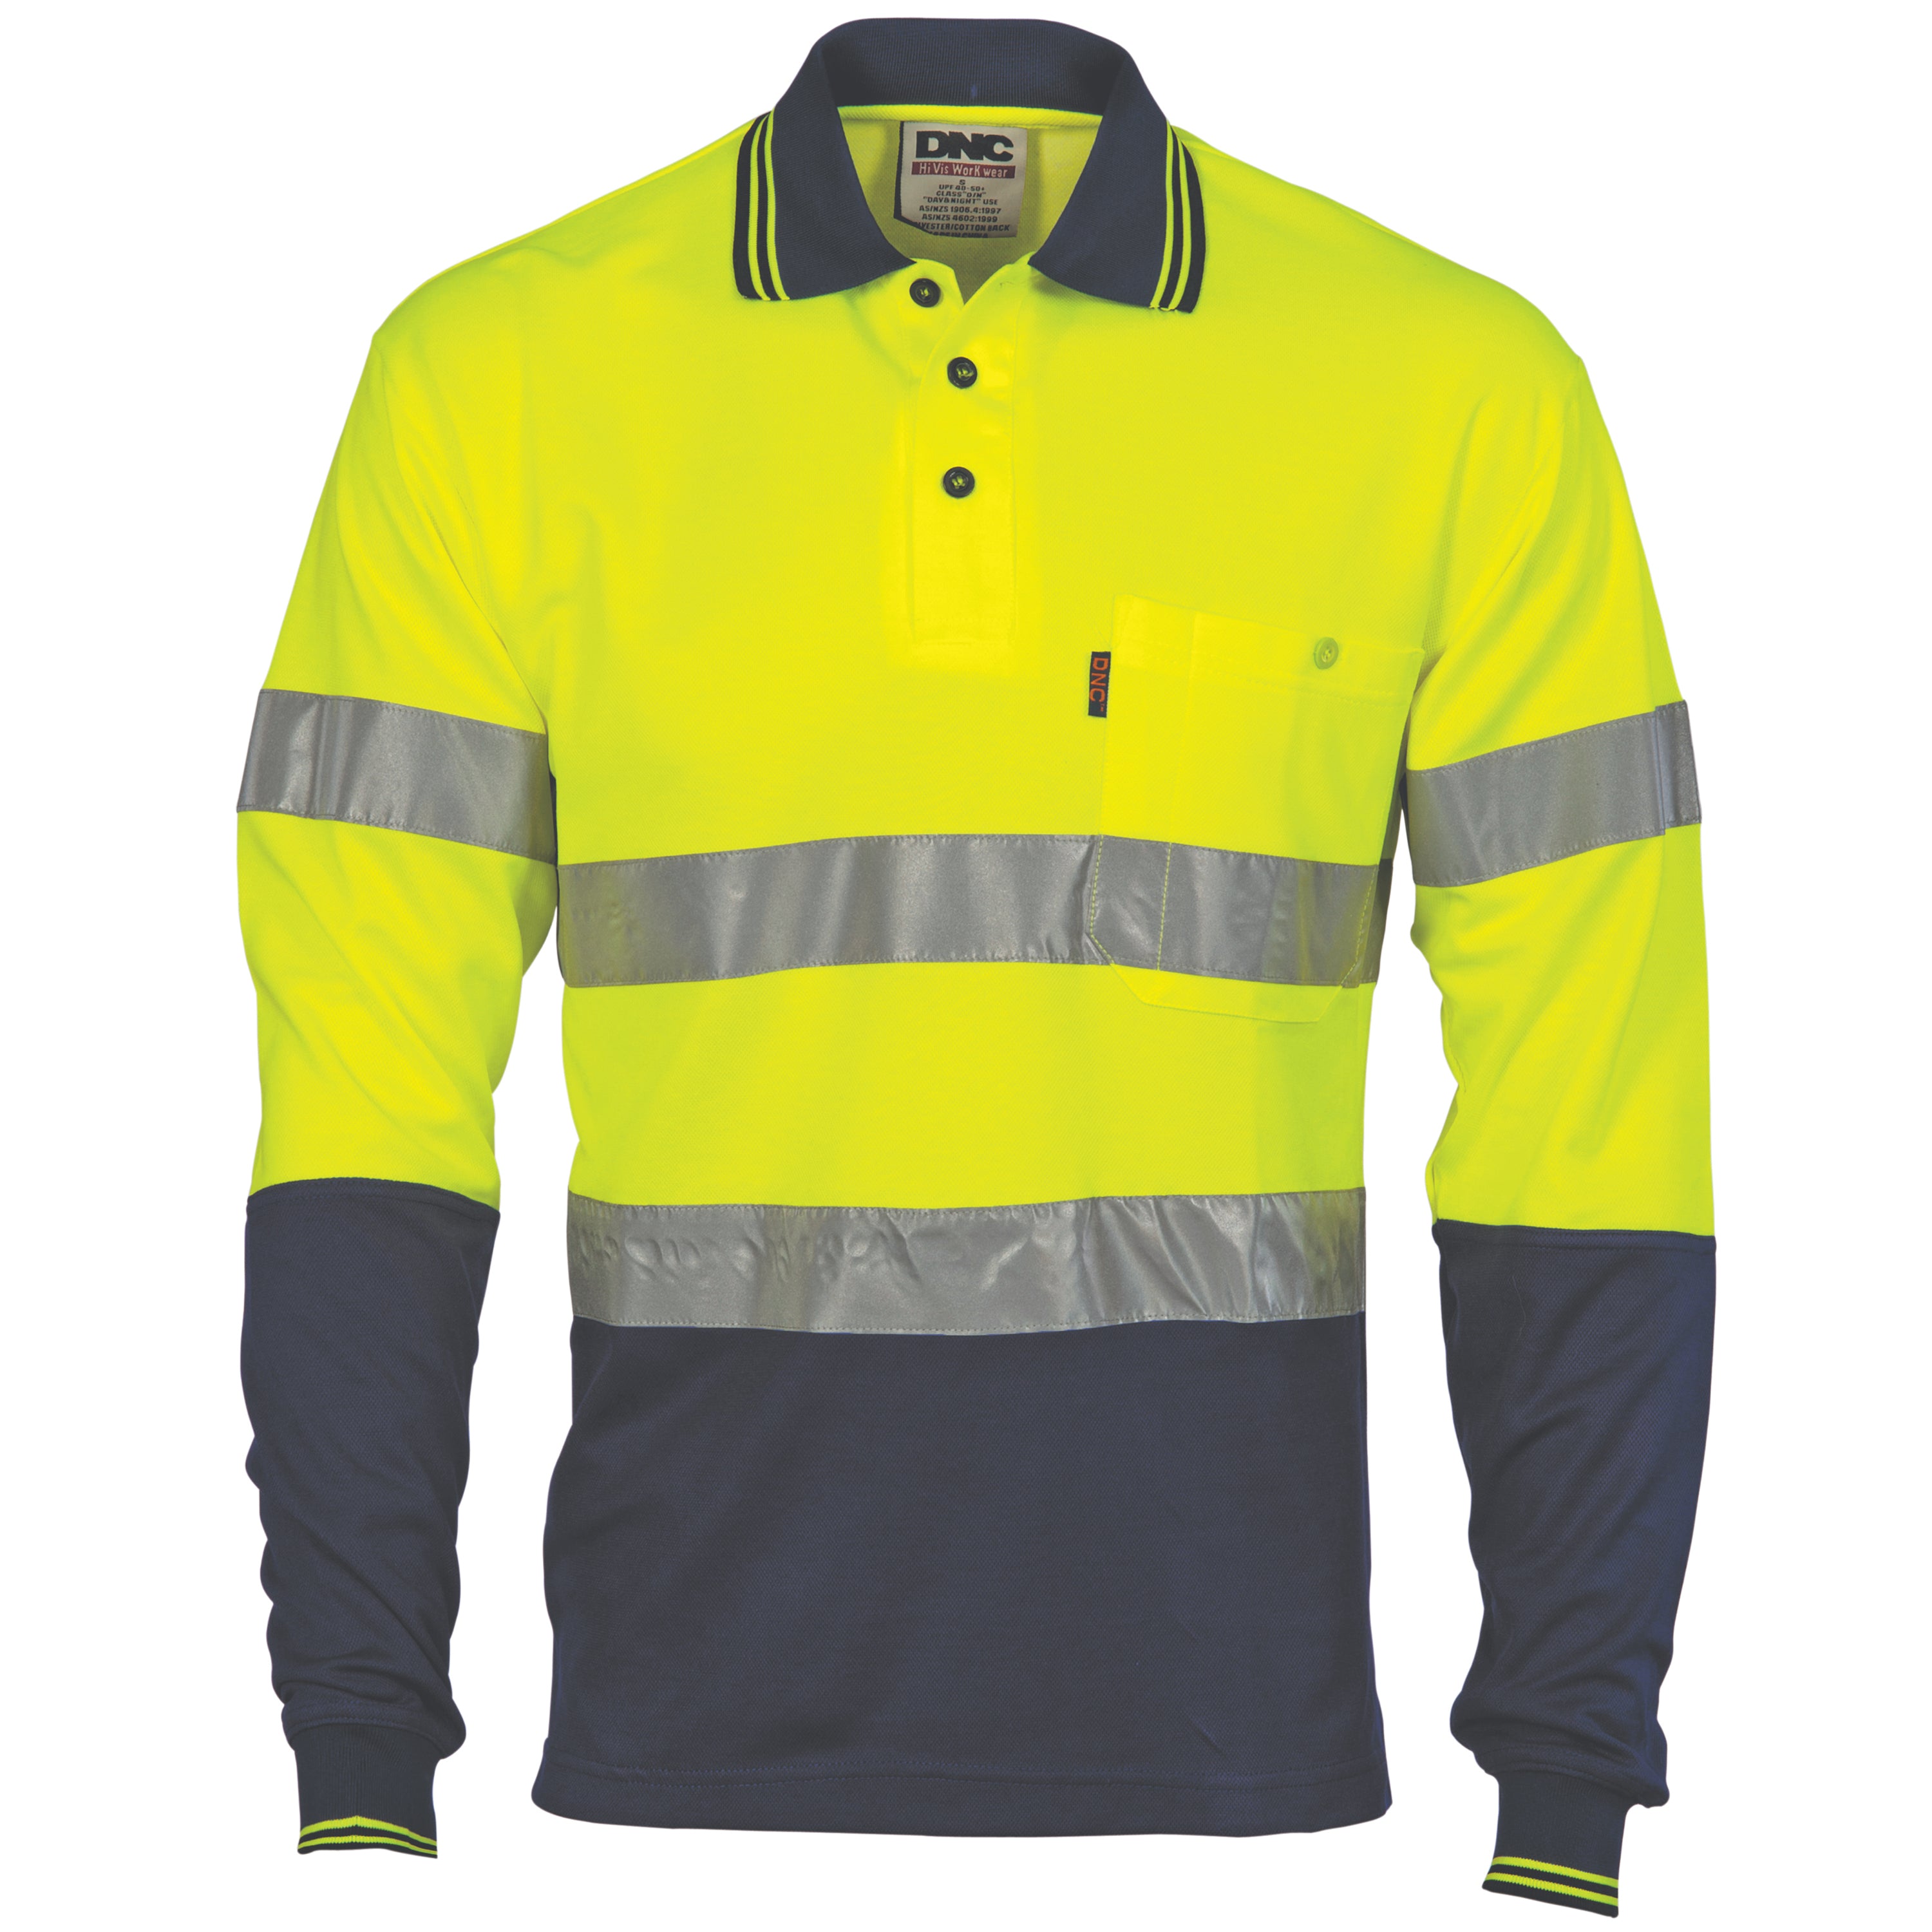 DNC - 3718 - Hi Vis Two Tone Cotton Back Polos with Generic Reflective Tape - Long Sleeve